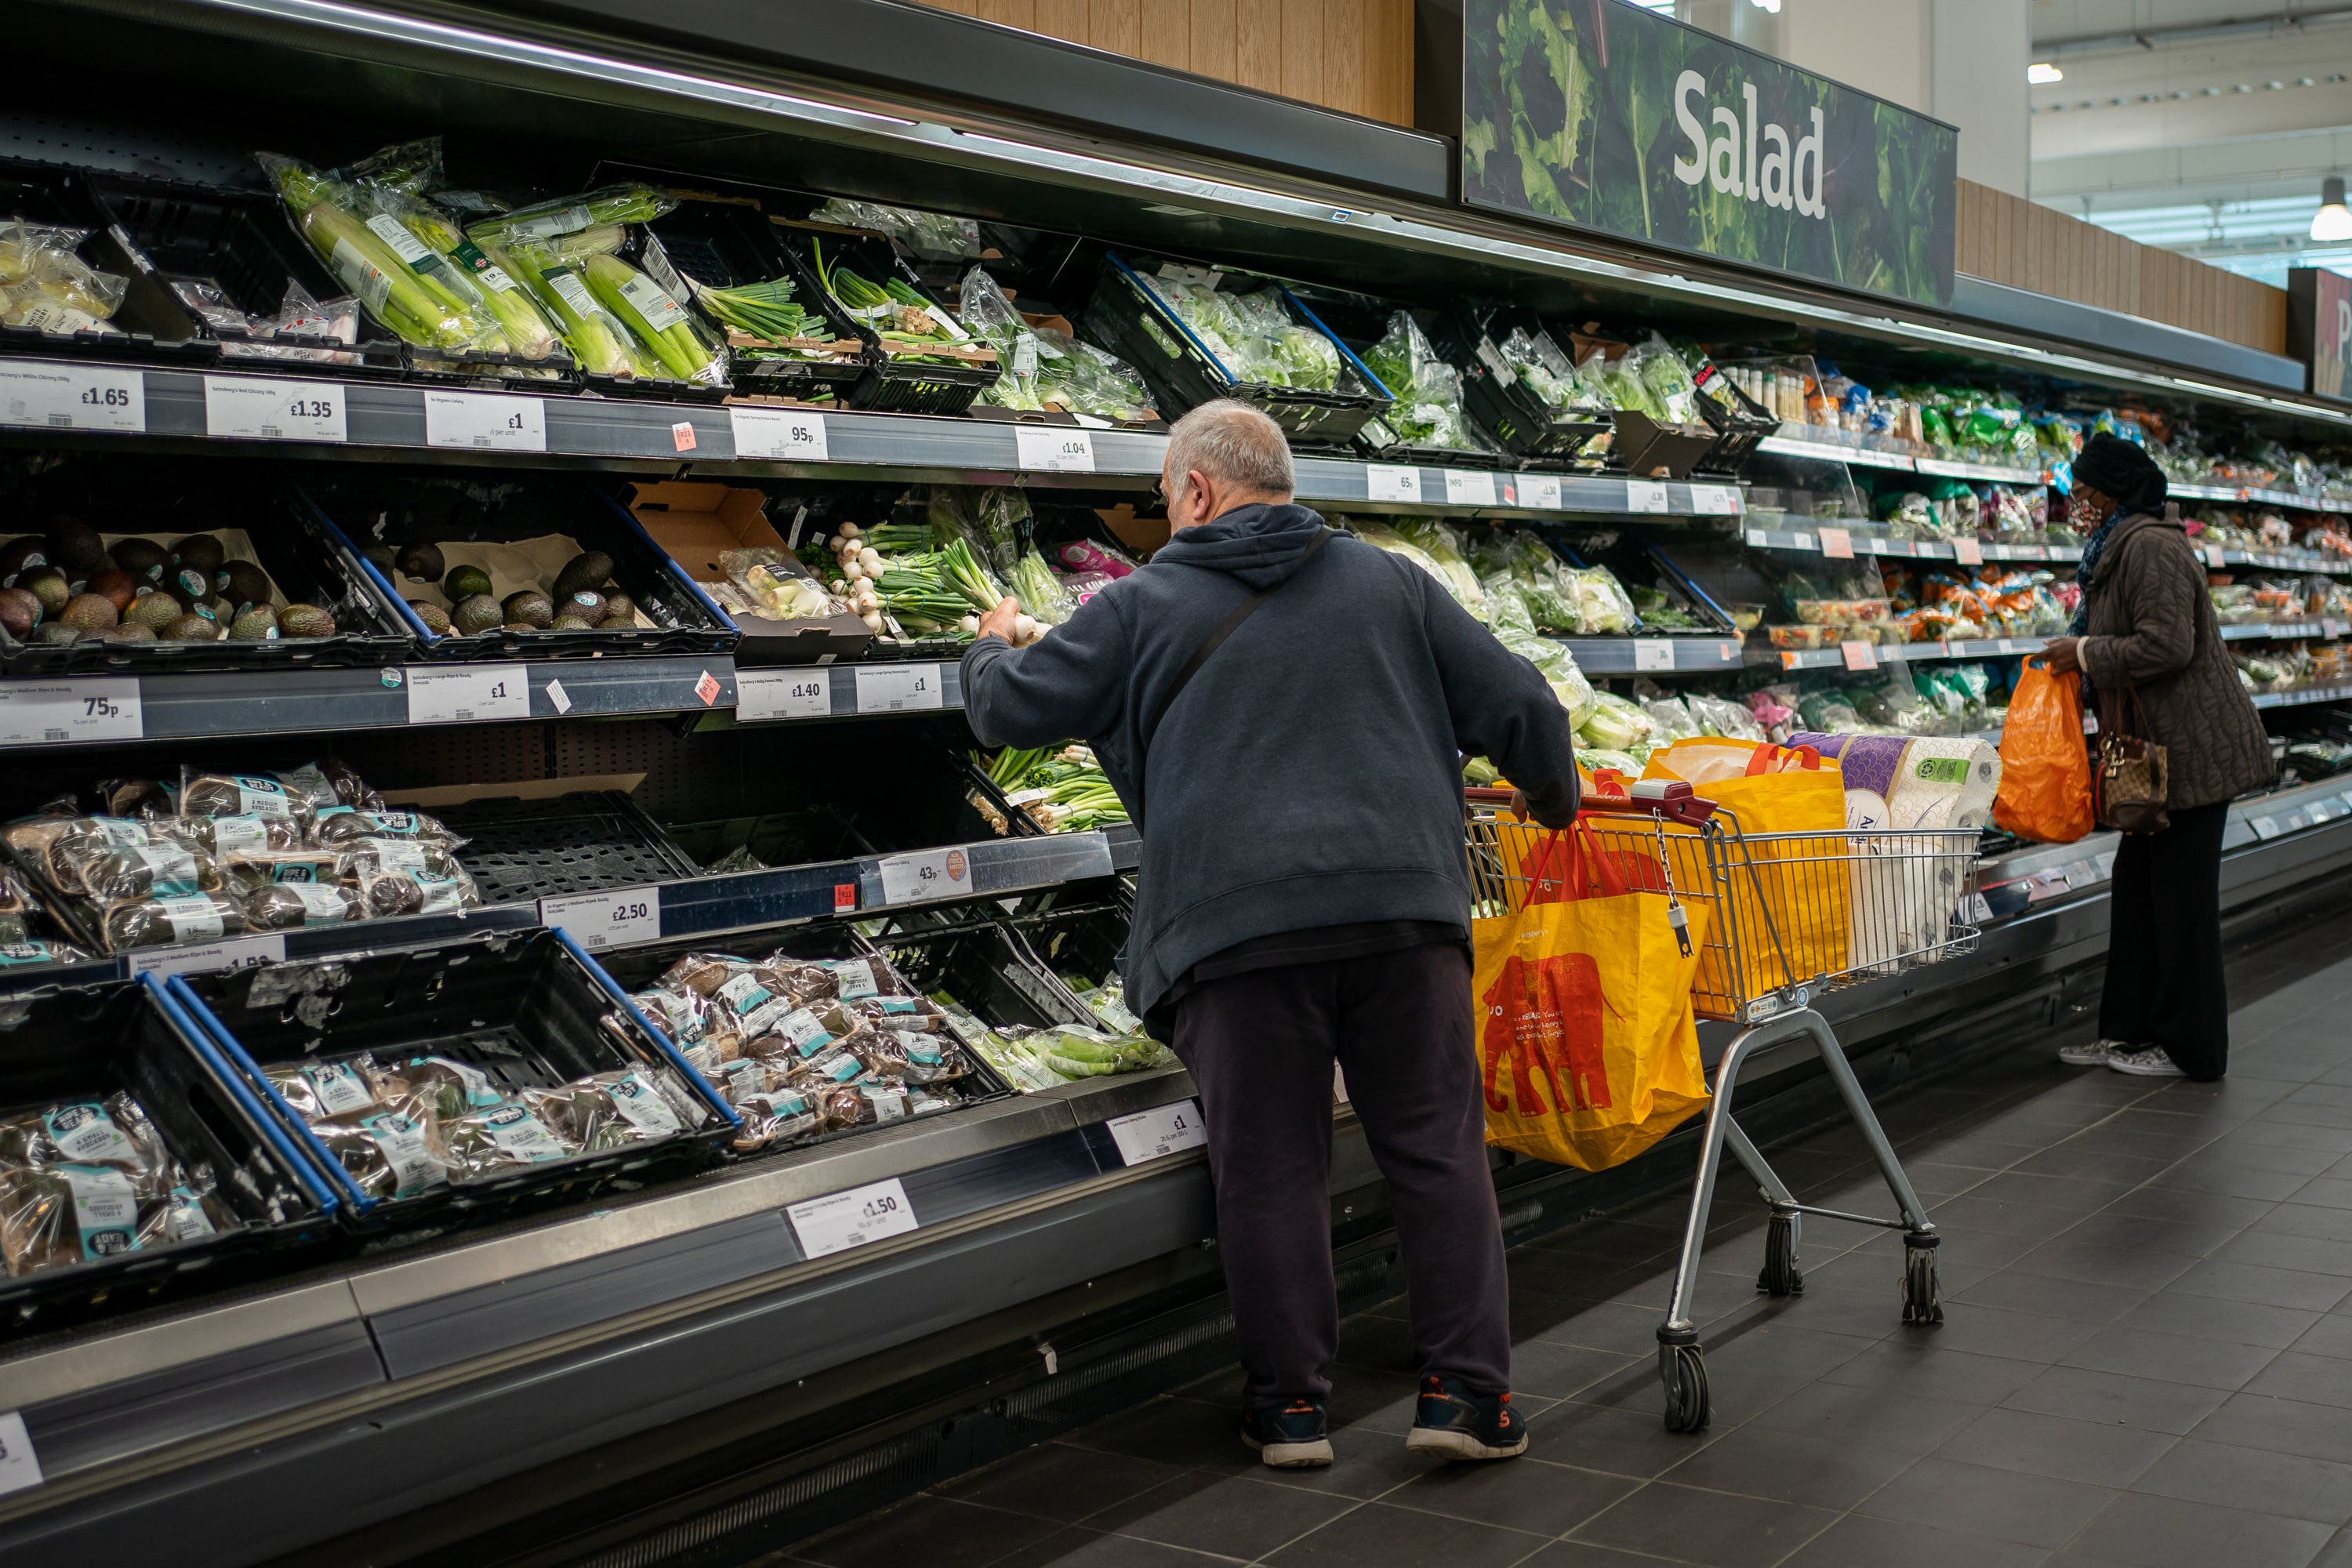 Food prices have eased slightly – the first decrease since September 2021